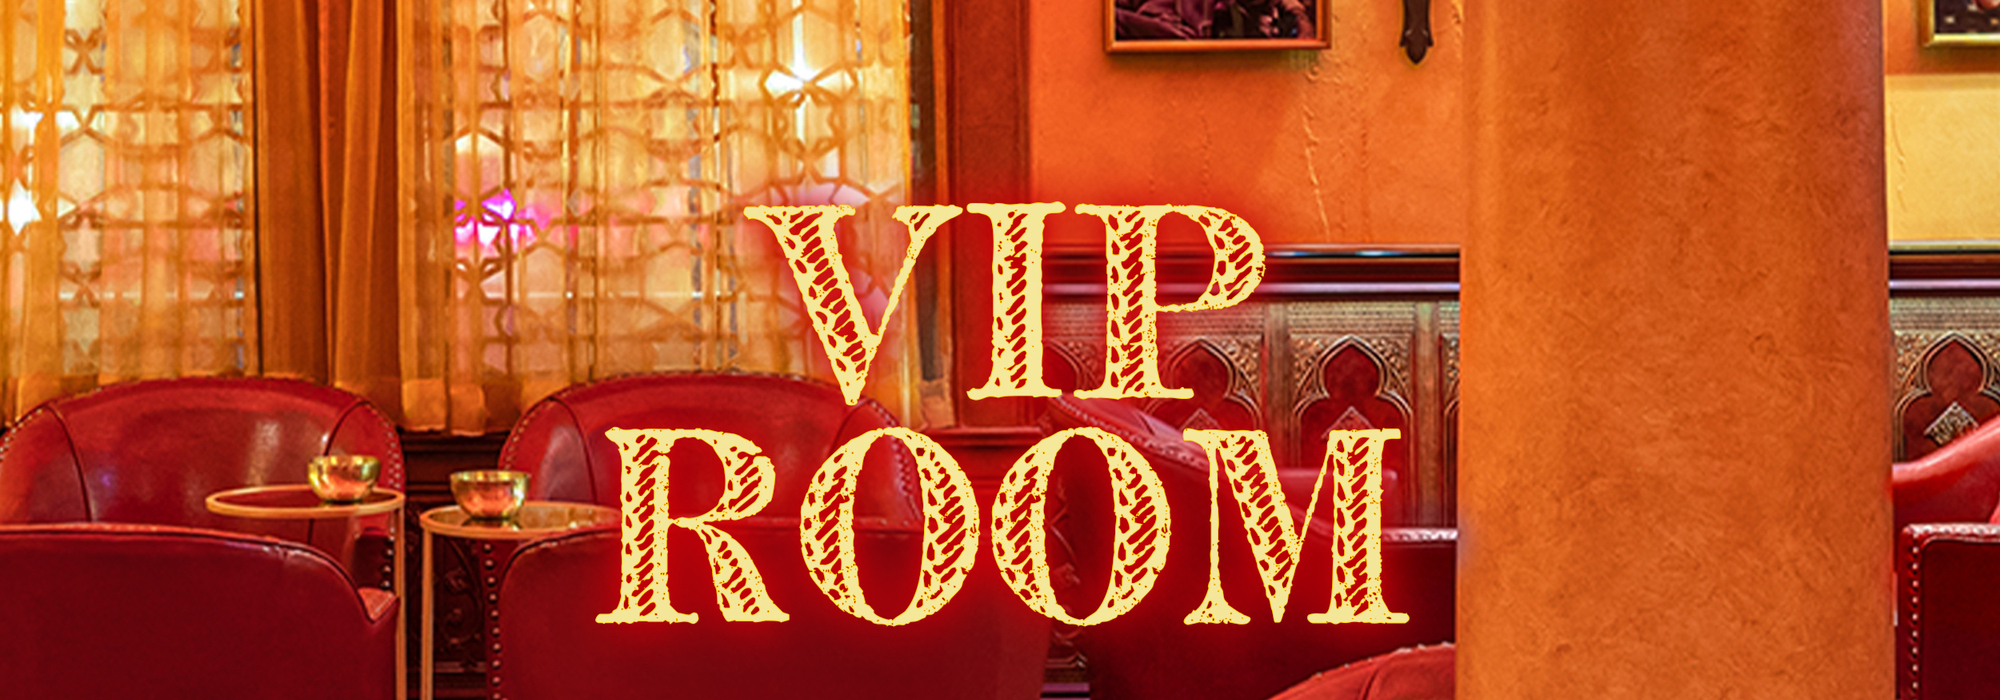 A Moulin Rouge! The Musical VIP Room Experience live event